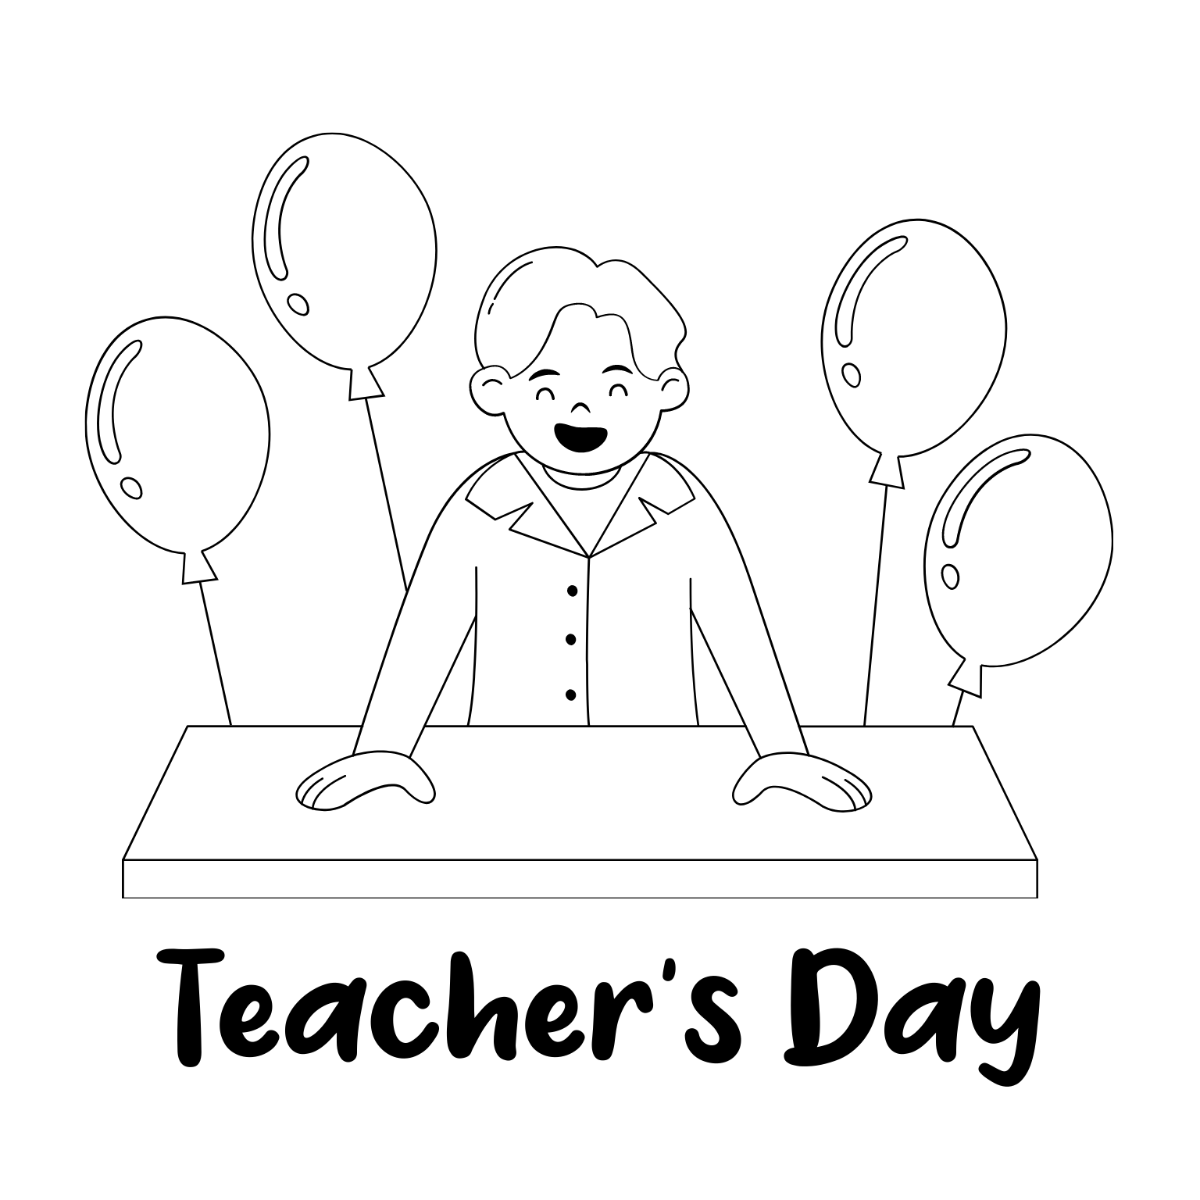 Teachers Day Concept Drawing Template